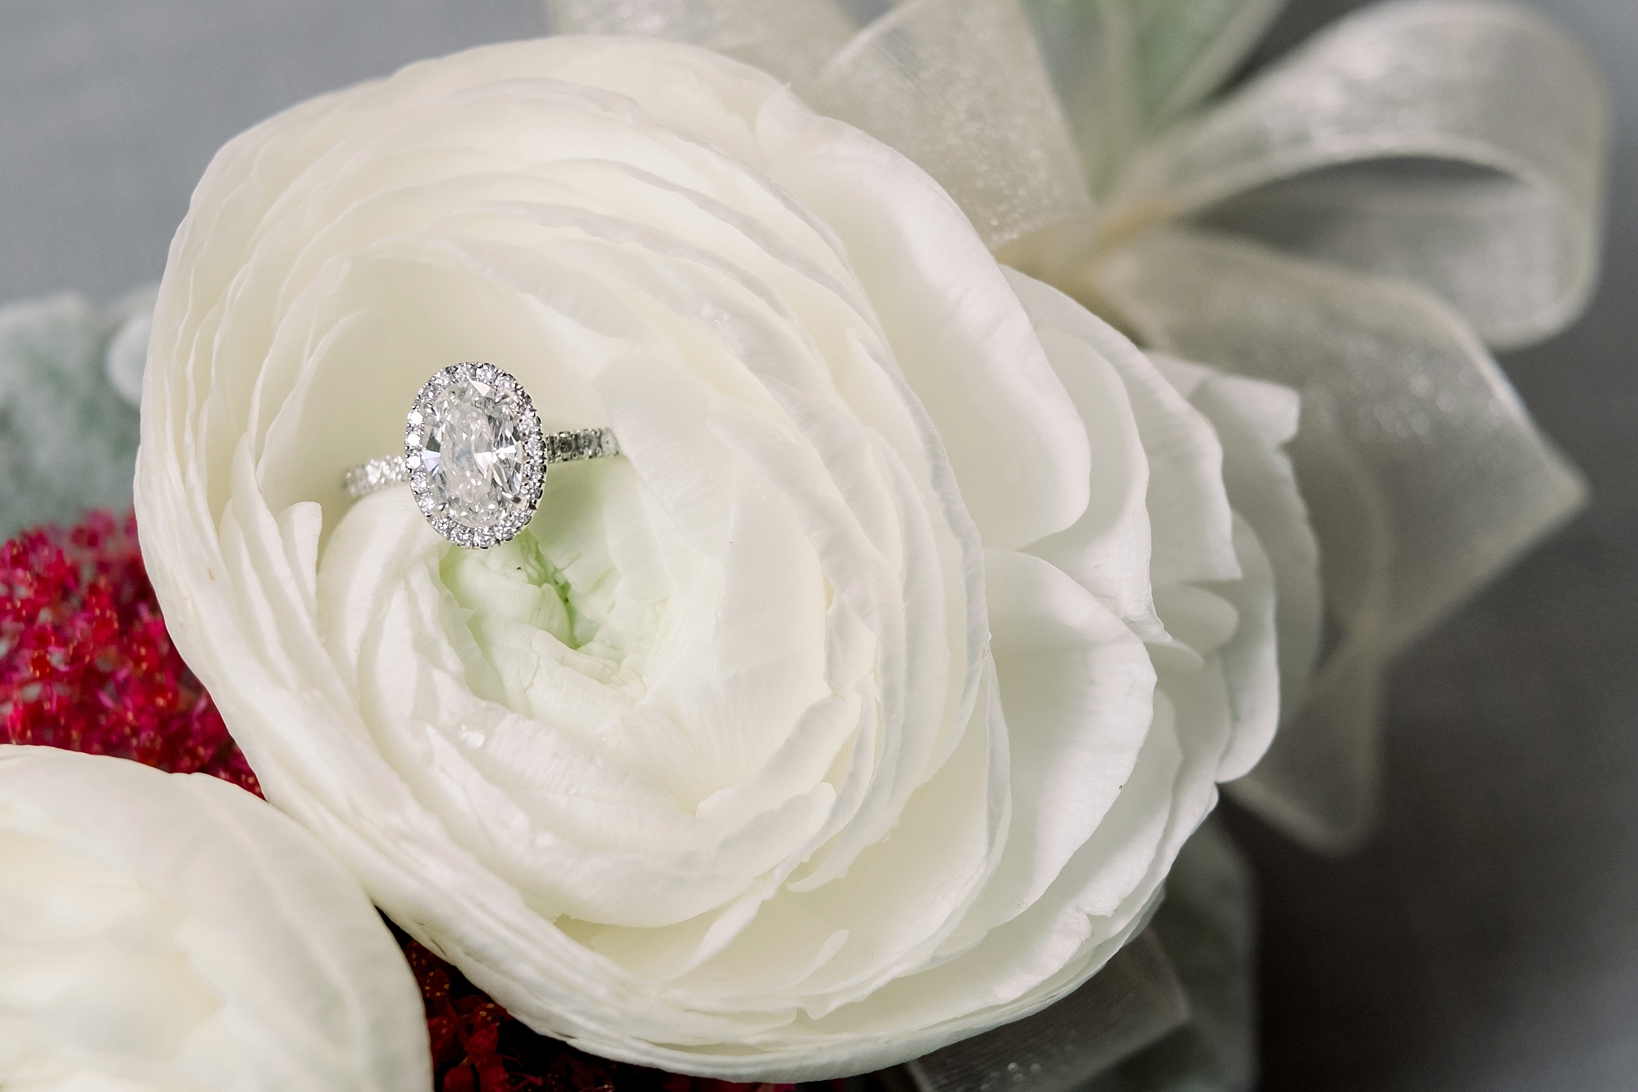 The Bride's engagement ring inside a white flower by Sarah & Ben Photography